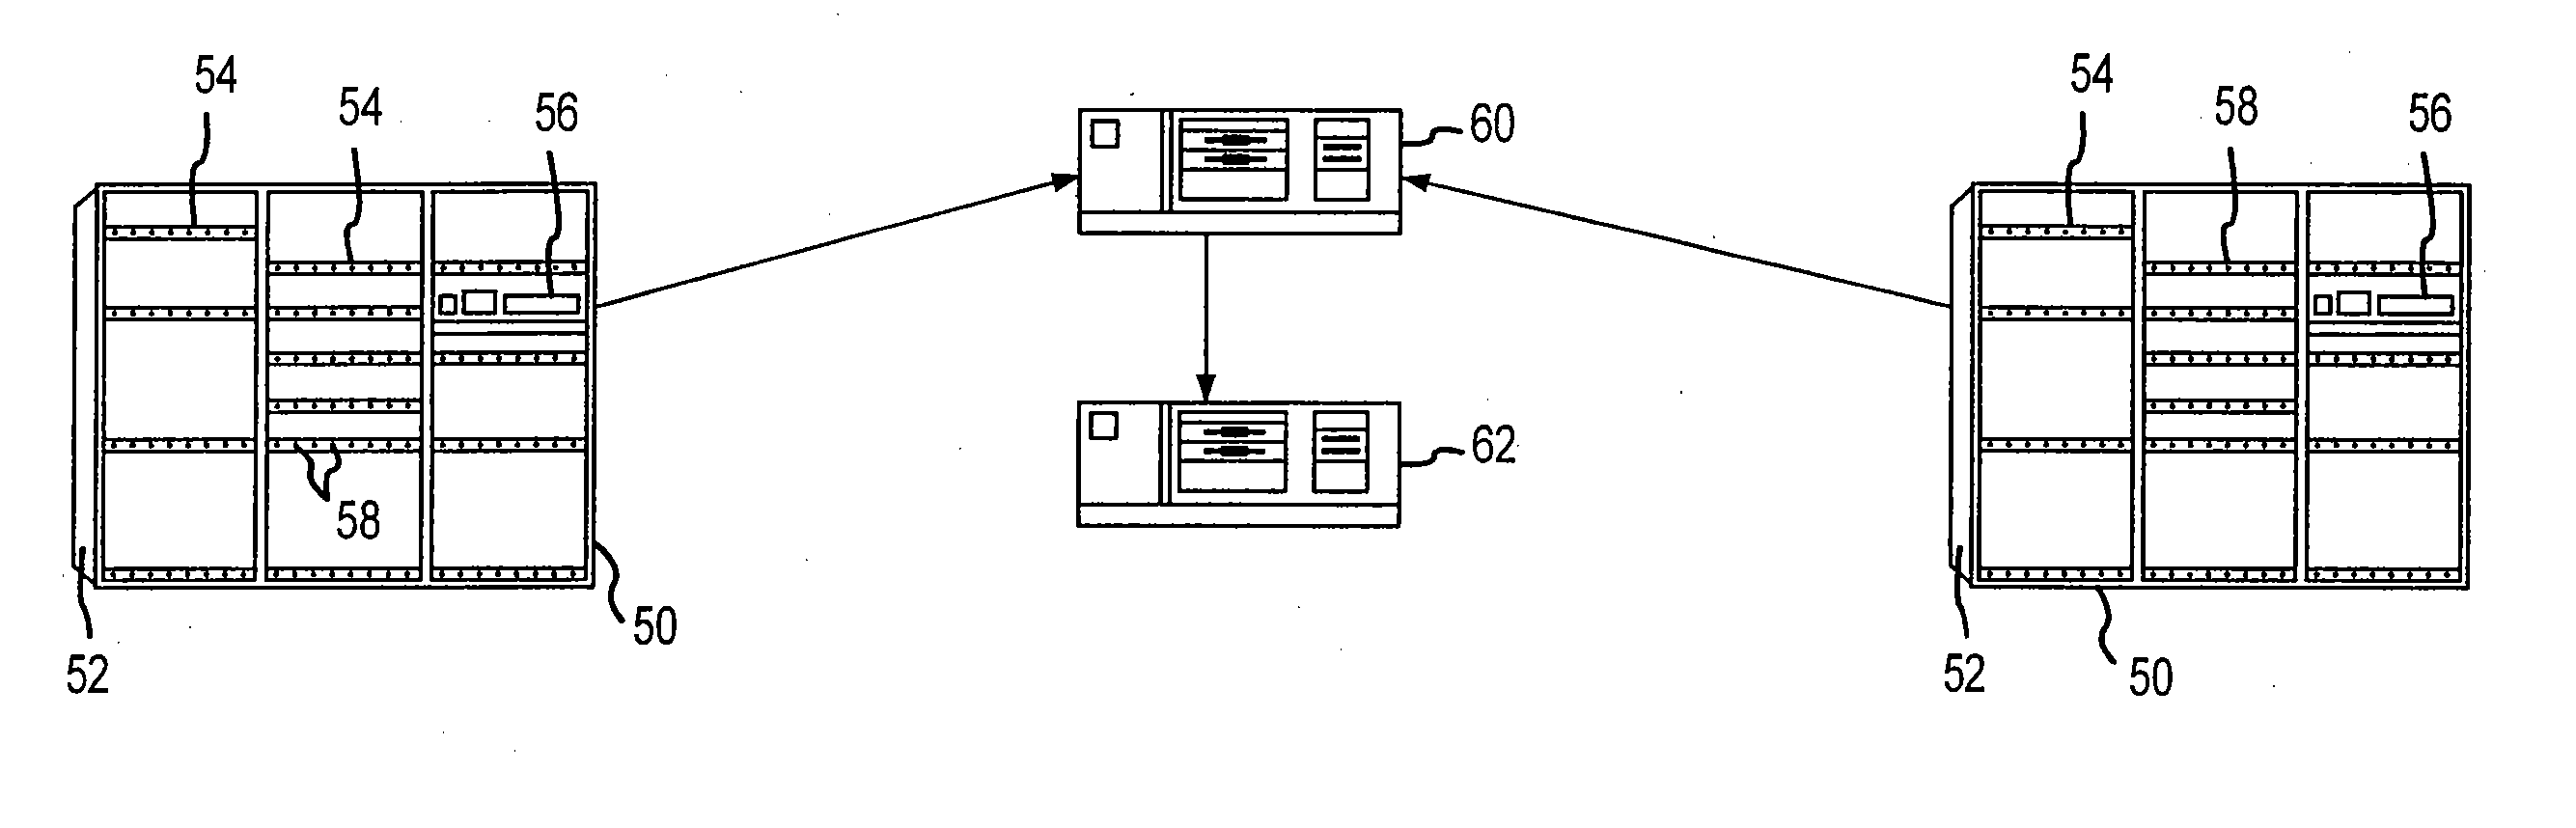 Systems and methods for purchasing, invoicing and distributing items